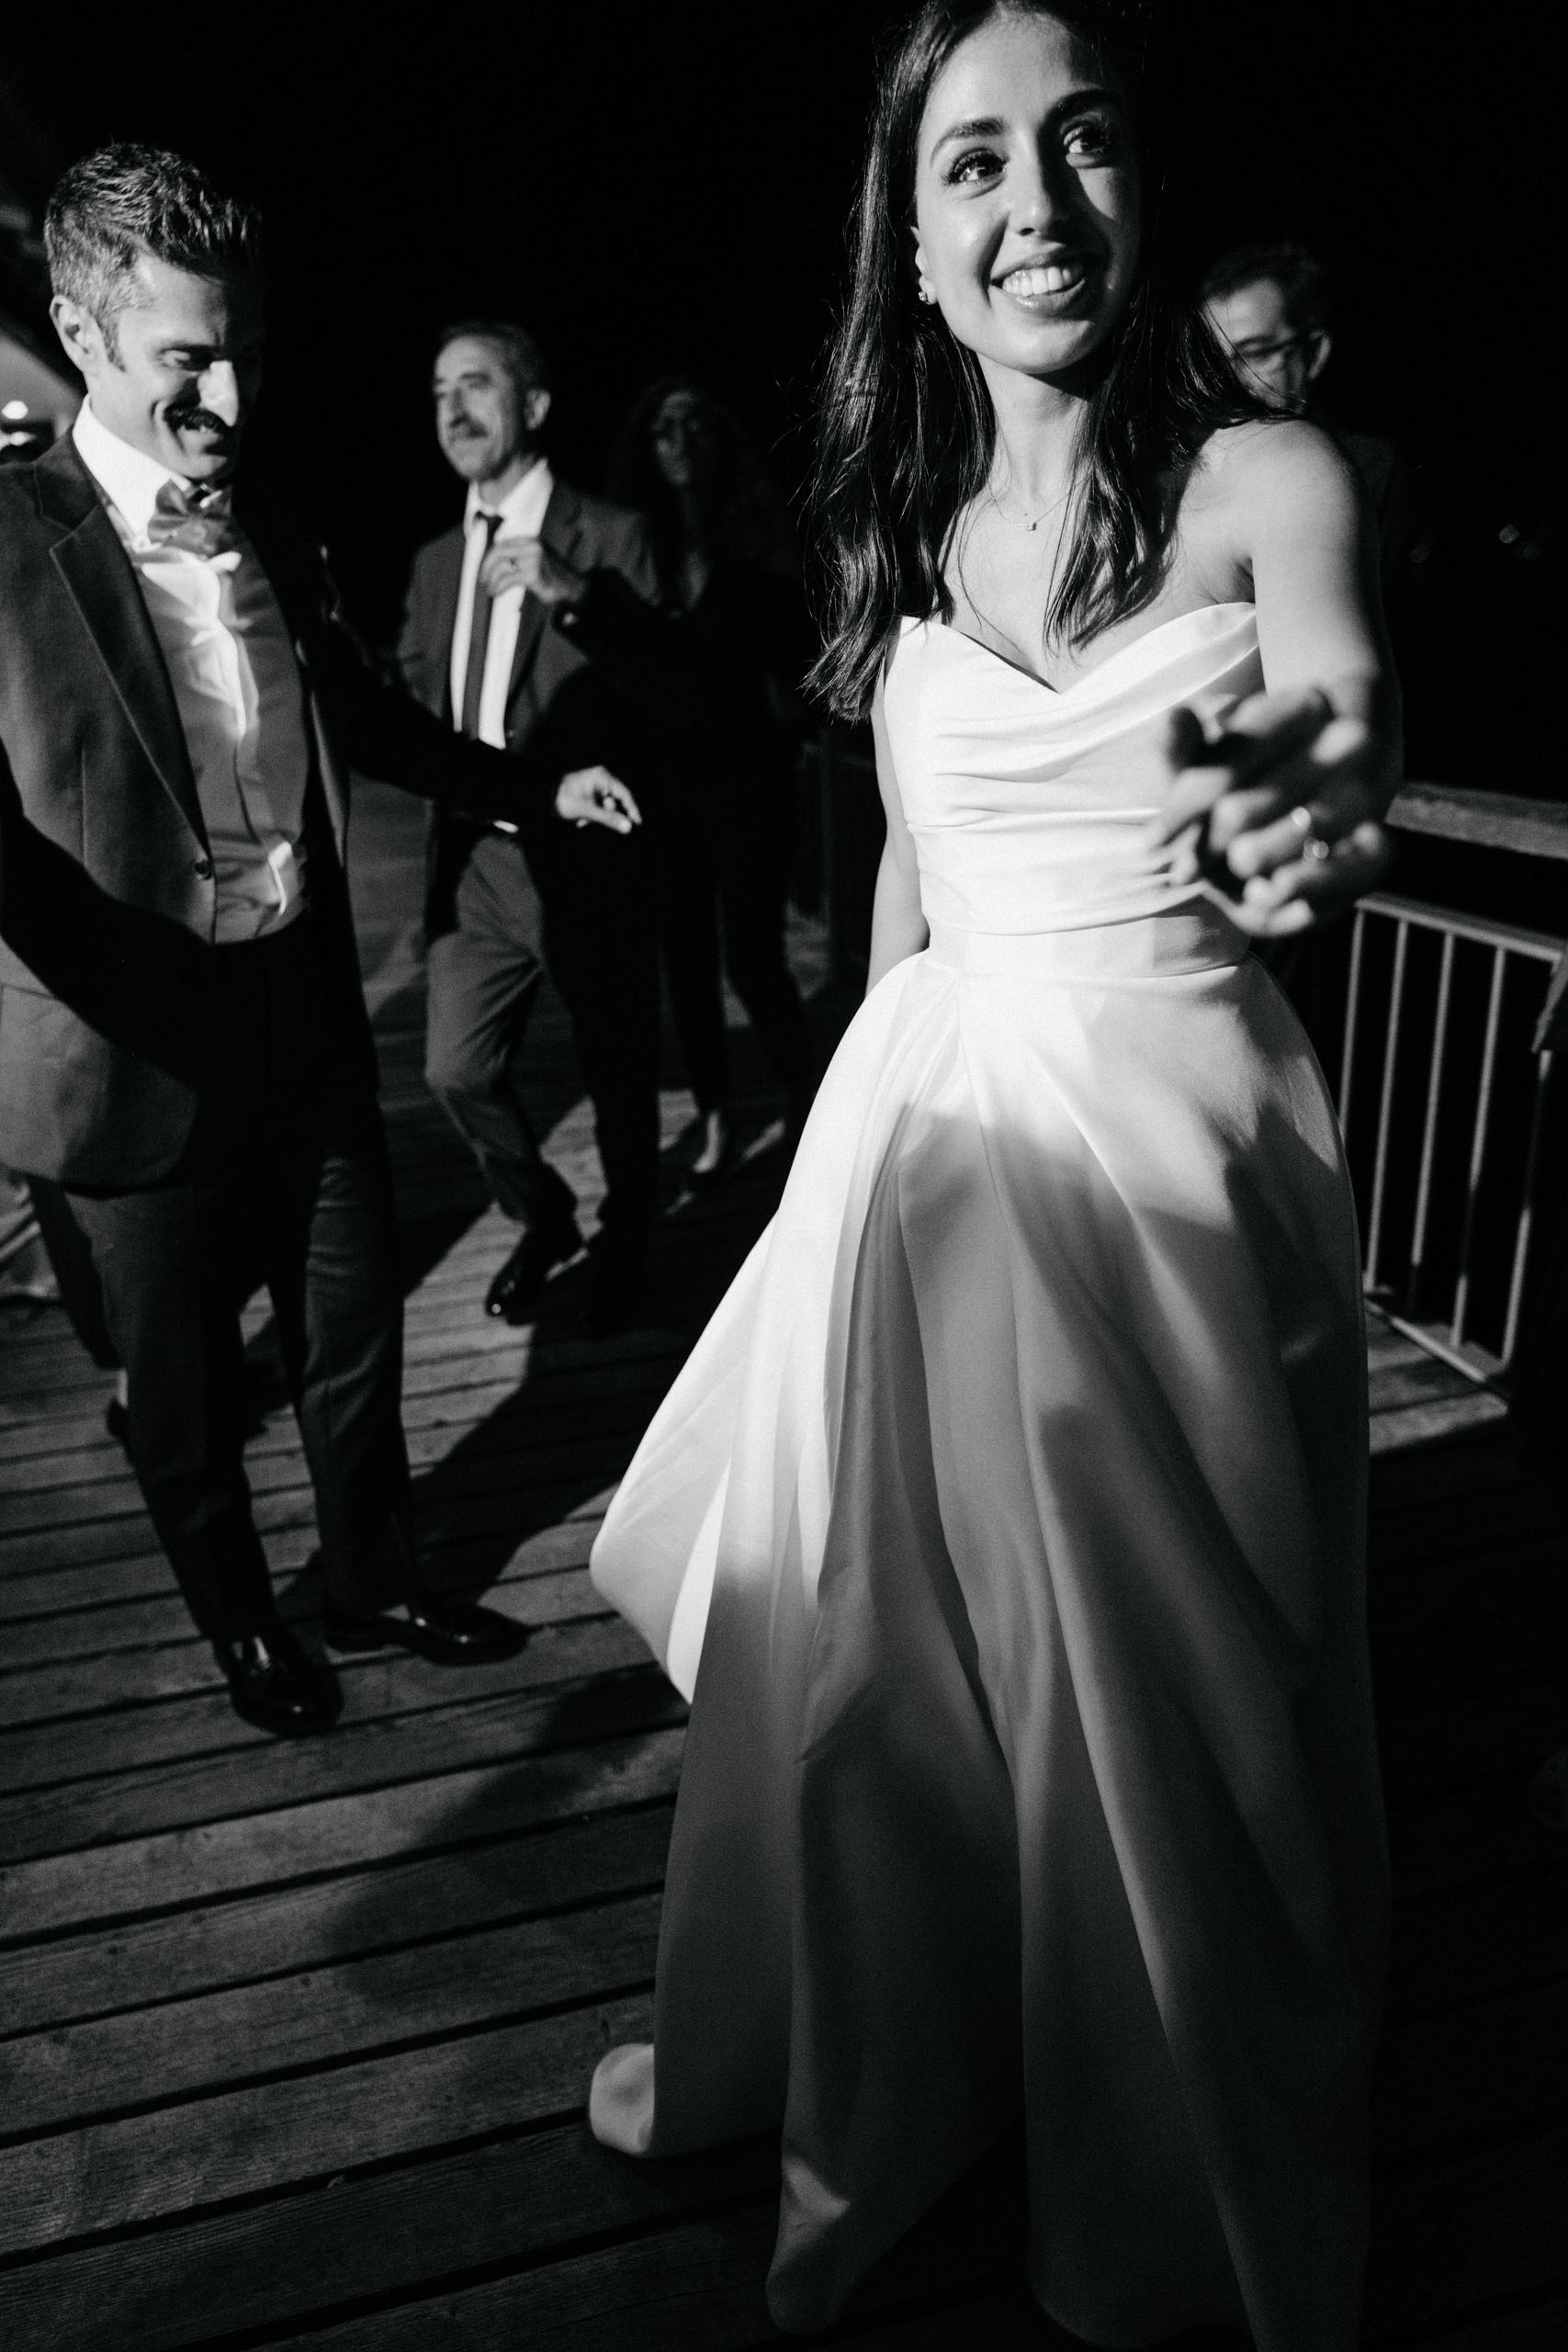 modern wedding photography in munich and tegernsee21h26m rn102114